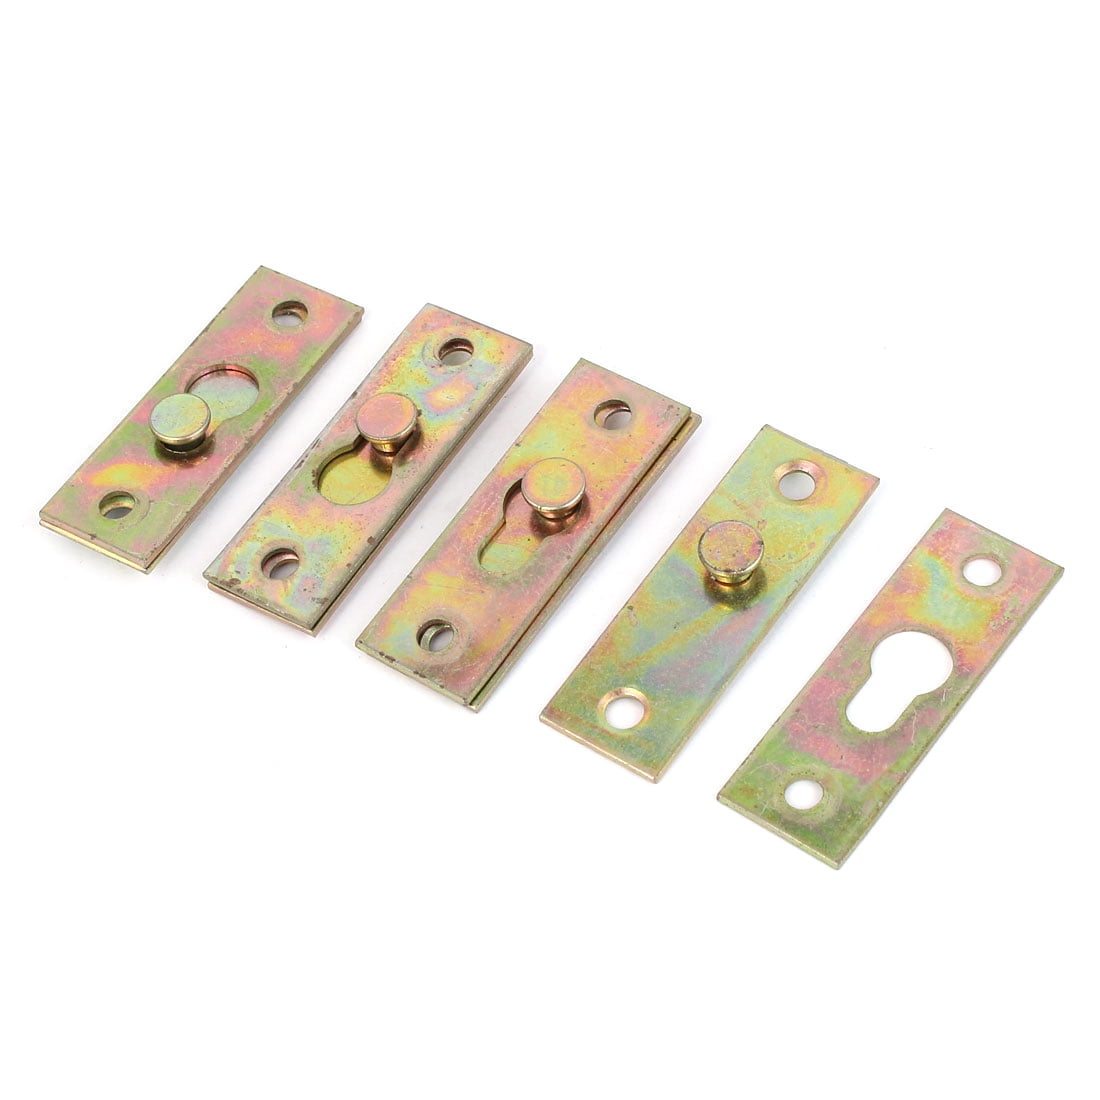 bed rail hook plates, bed rail hook plates Suppliers and